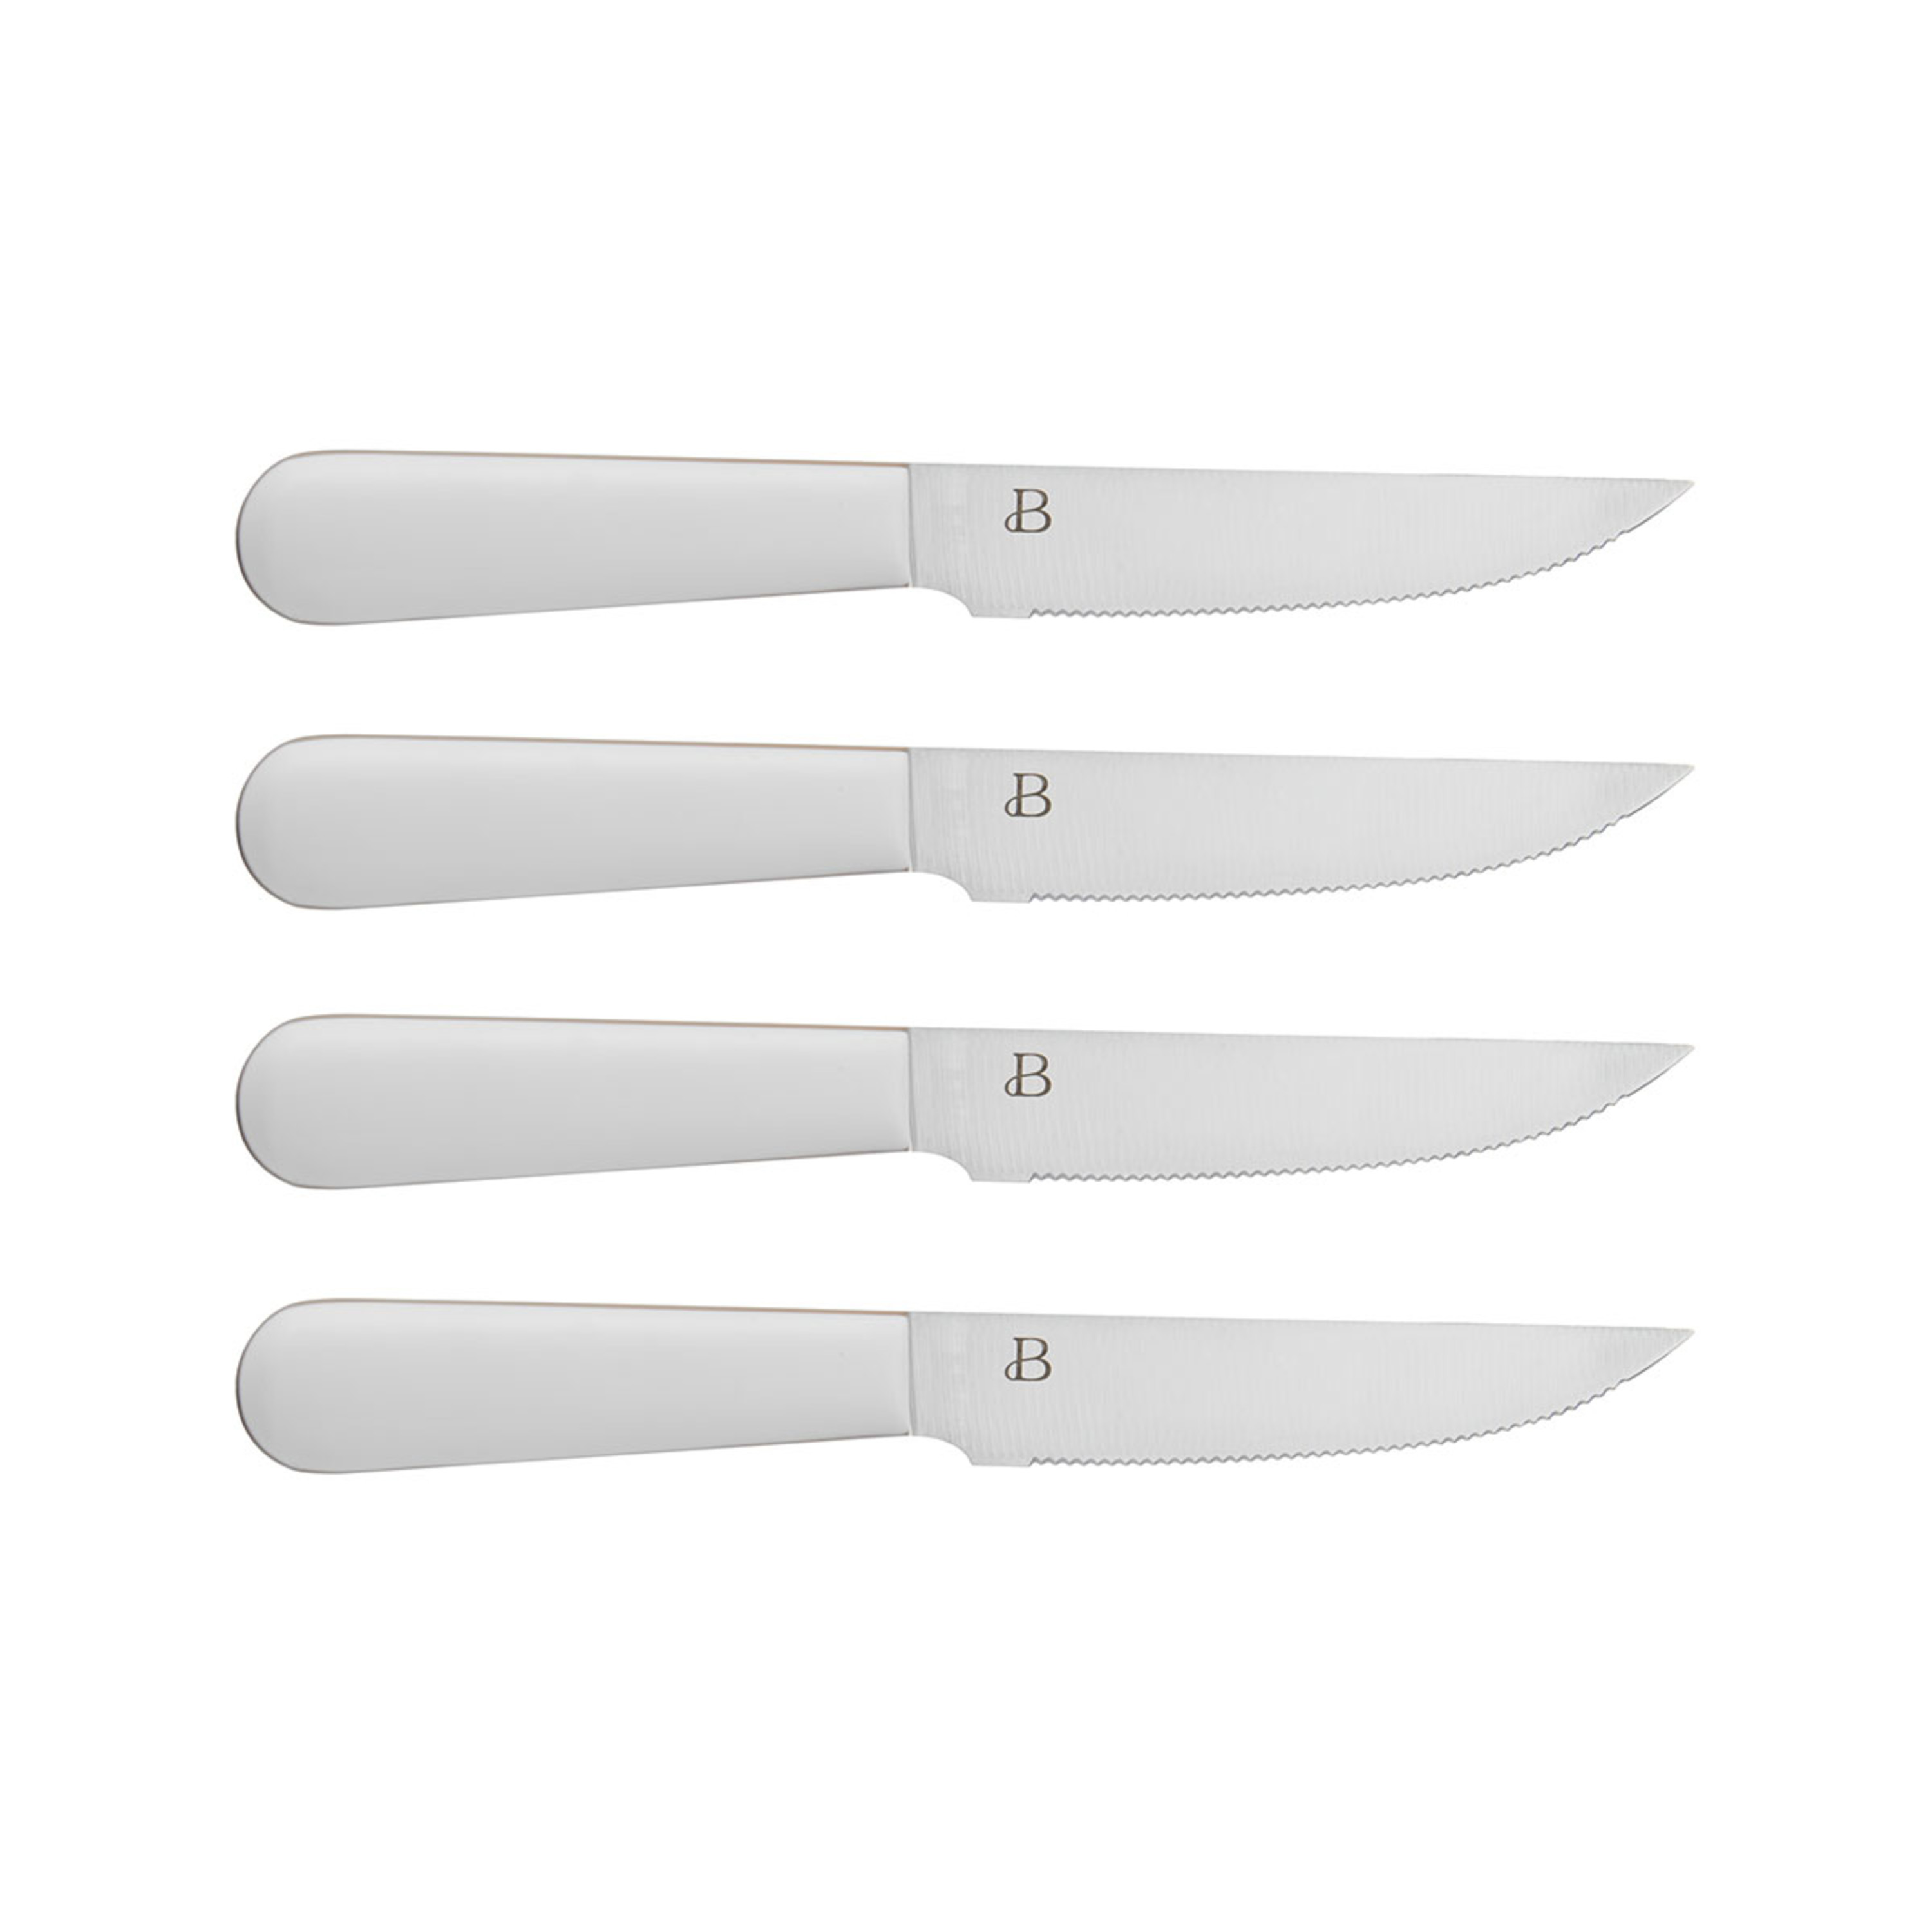 Beautiful 4-piece Forged, Micro-Serrated Kitchen Steak Knife Set in White - image 1 of 6